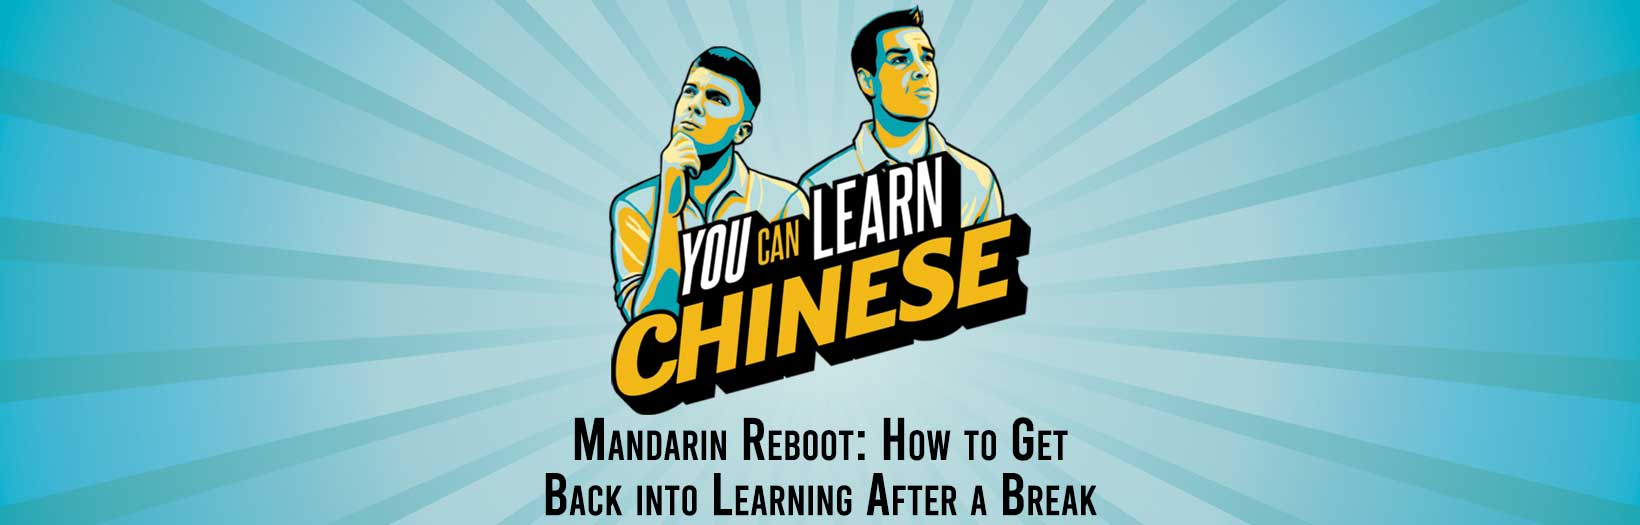 Mandarin reboot: How to get back into learning after taking a break